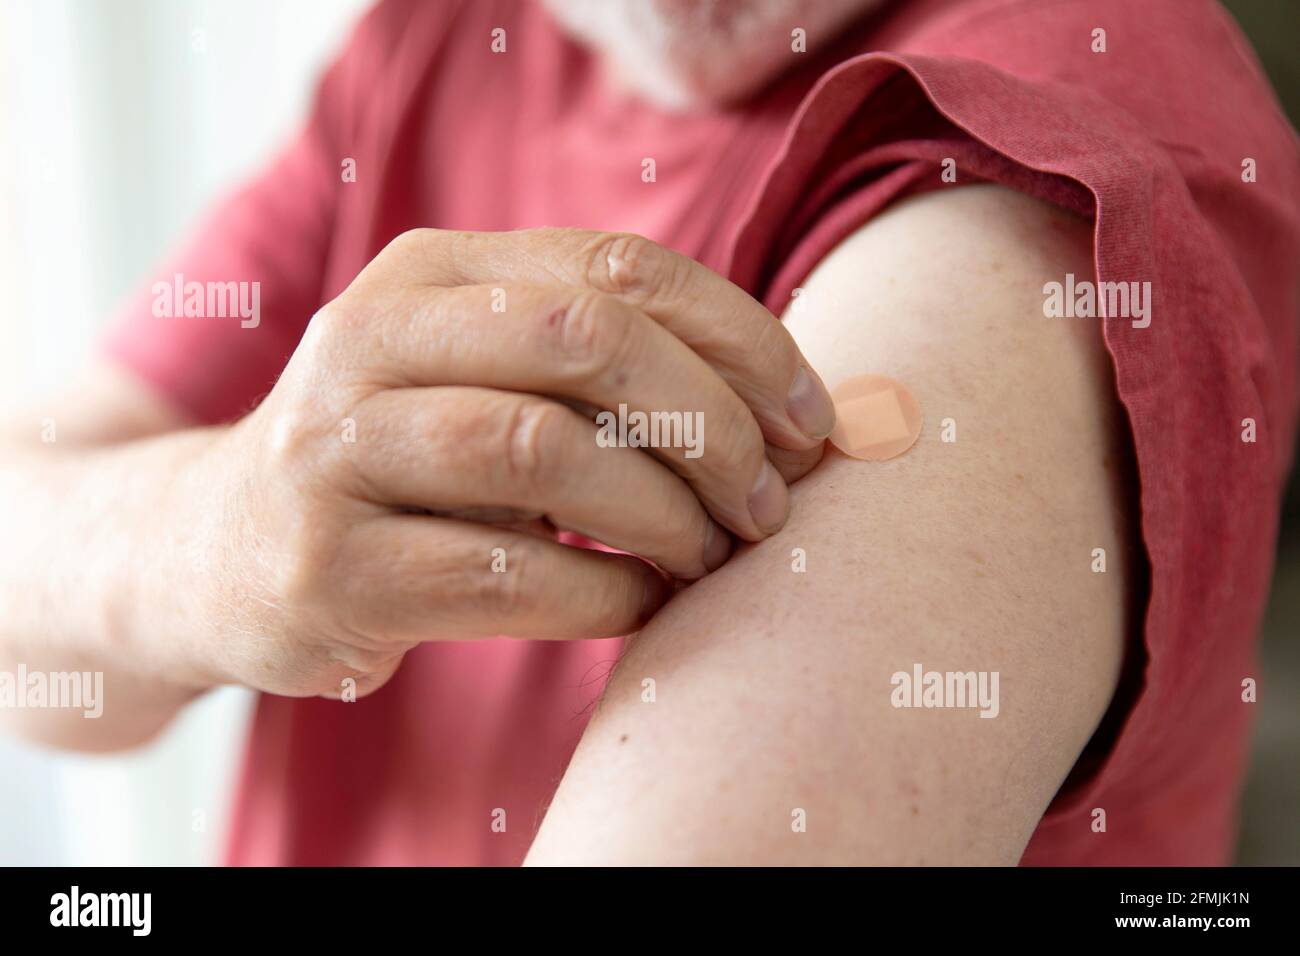 Caucasian man with a plaster on their arm after a vaccination injection Stock Photo